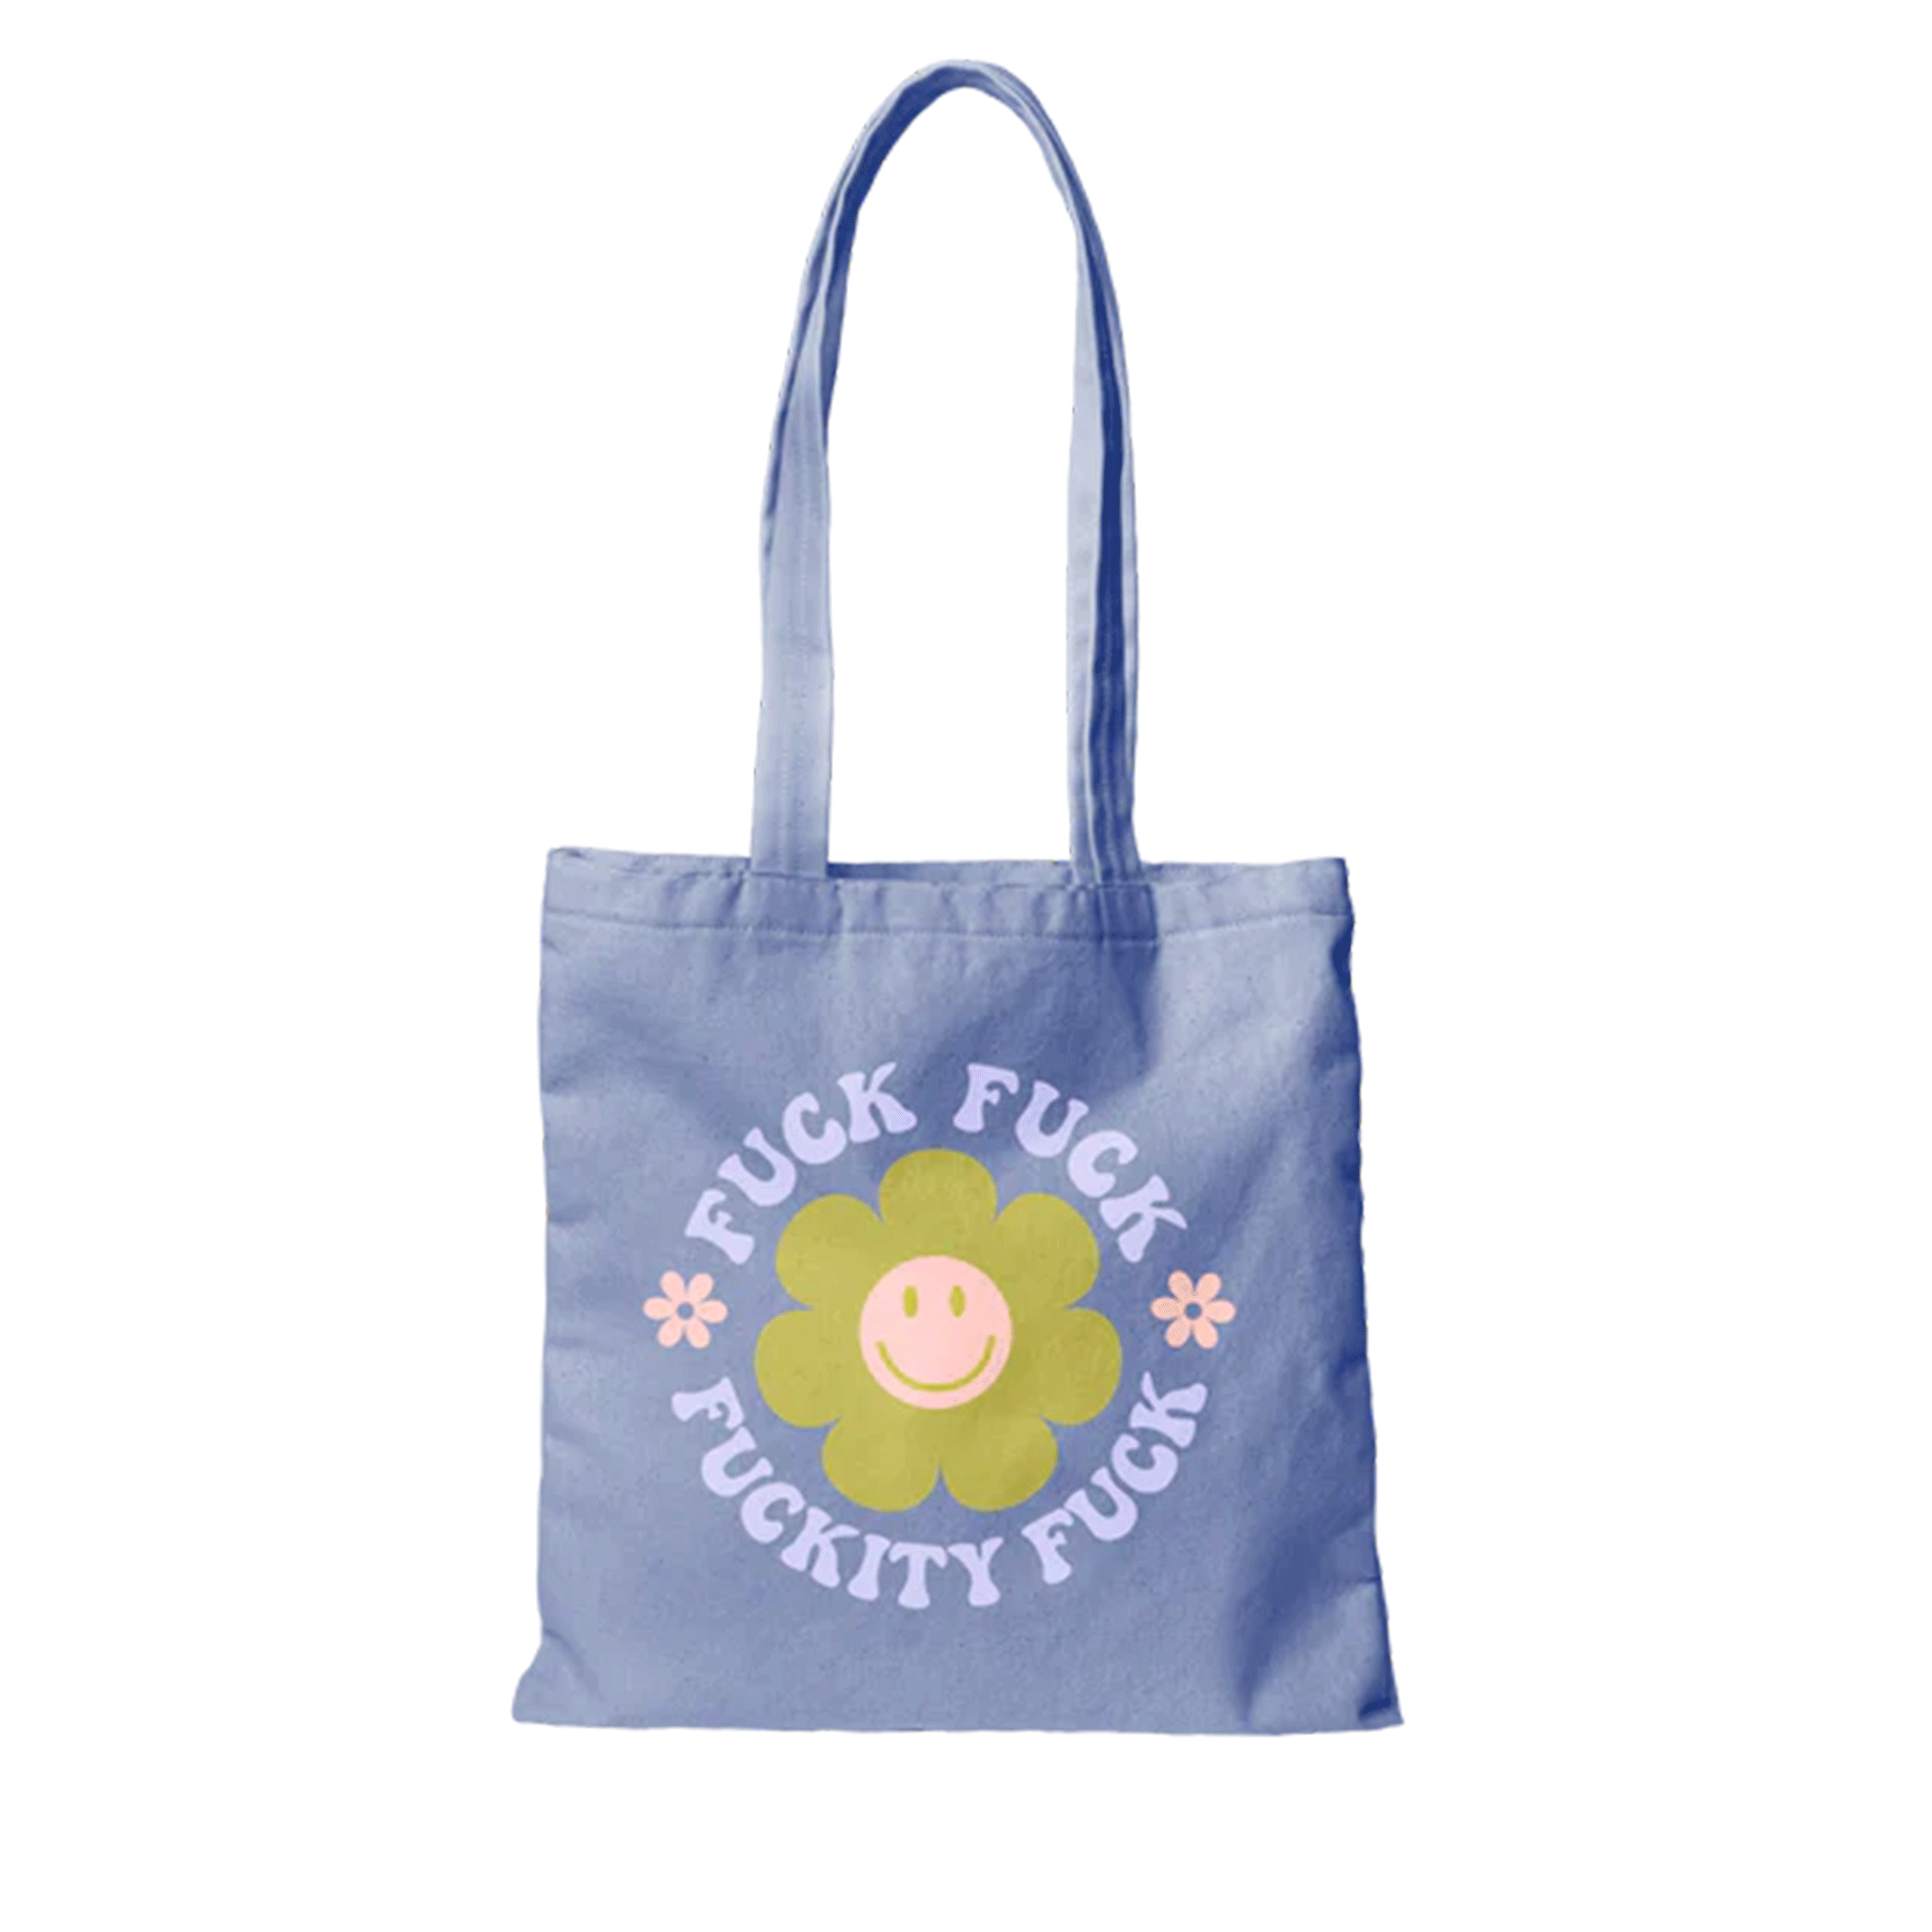 On a white background is a blue canvas tote bag with a smiley daisy graphic and text around the daisy that reads "Fuck Fuck Fuckity Fuck".